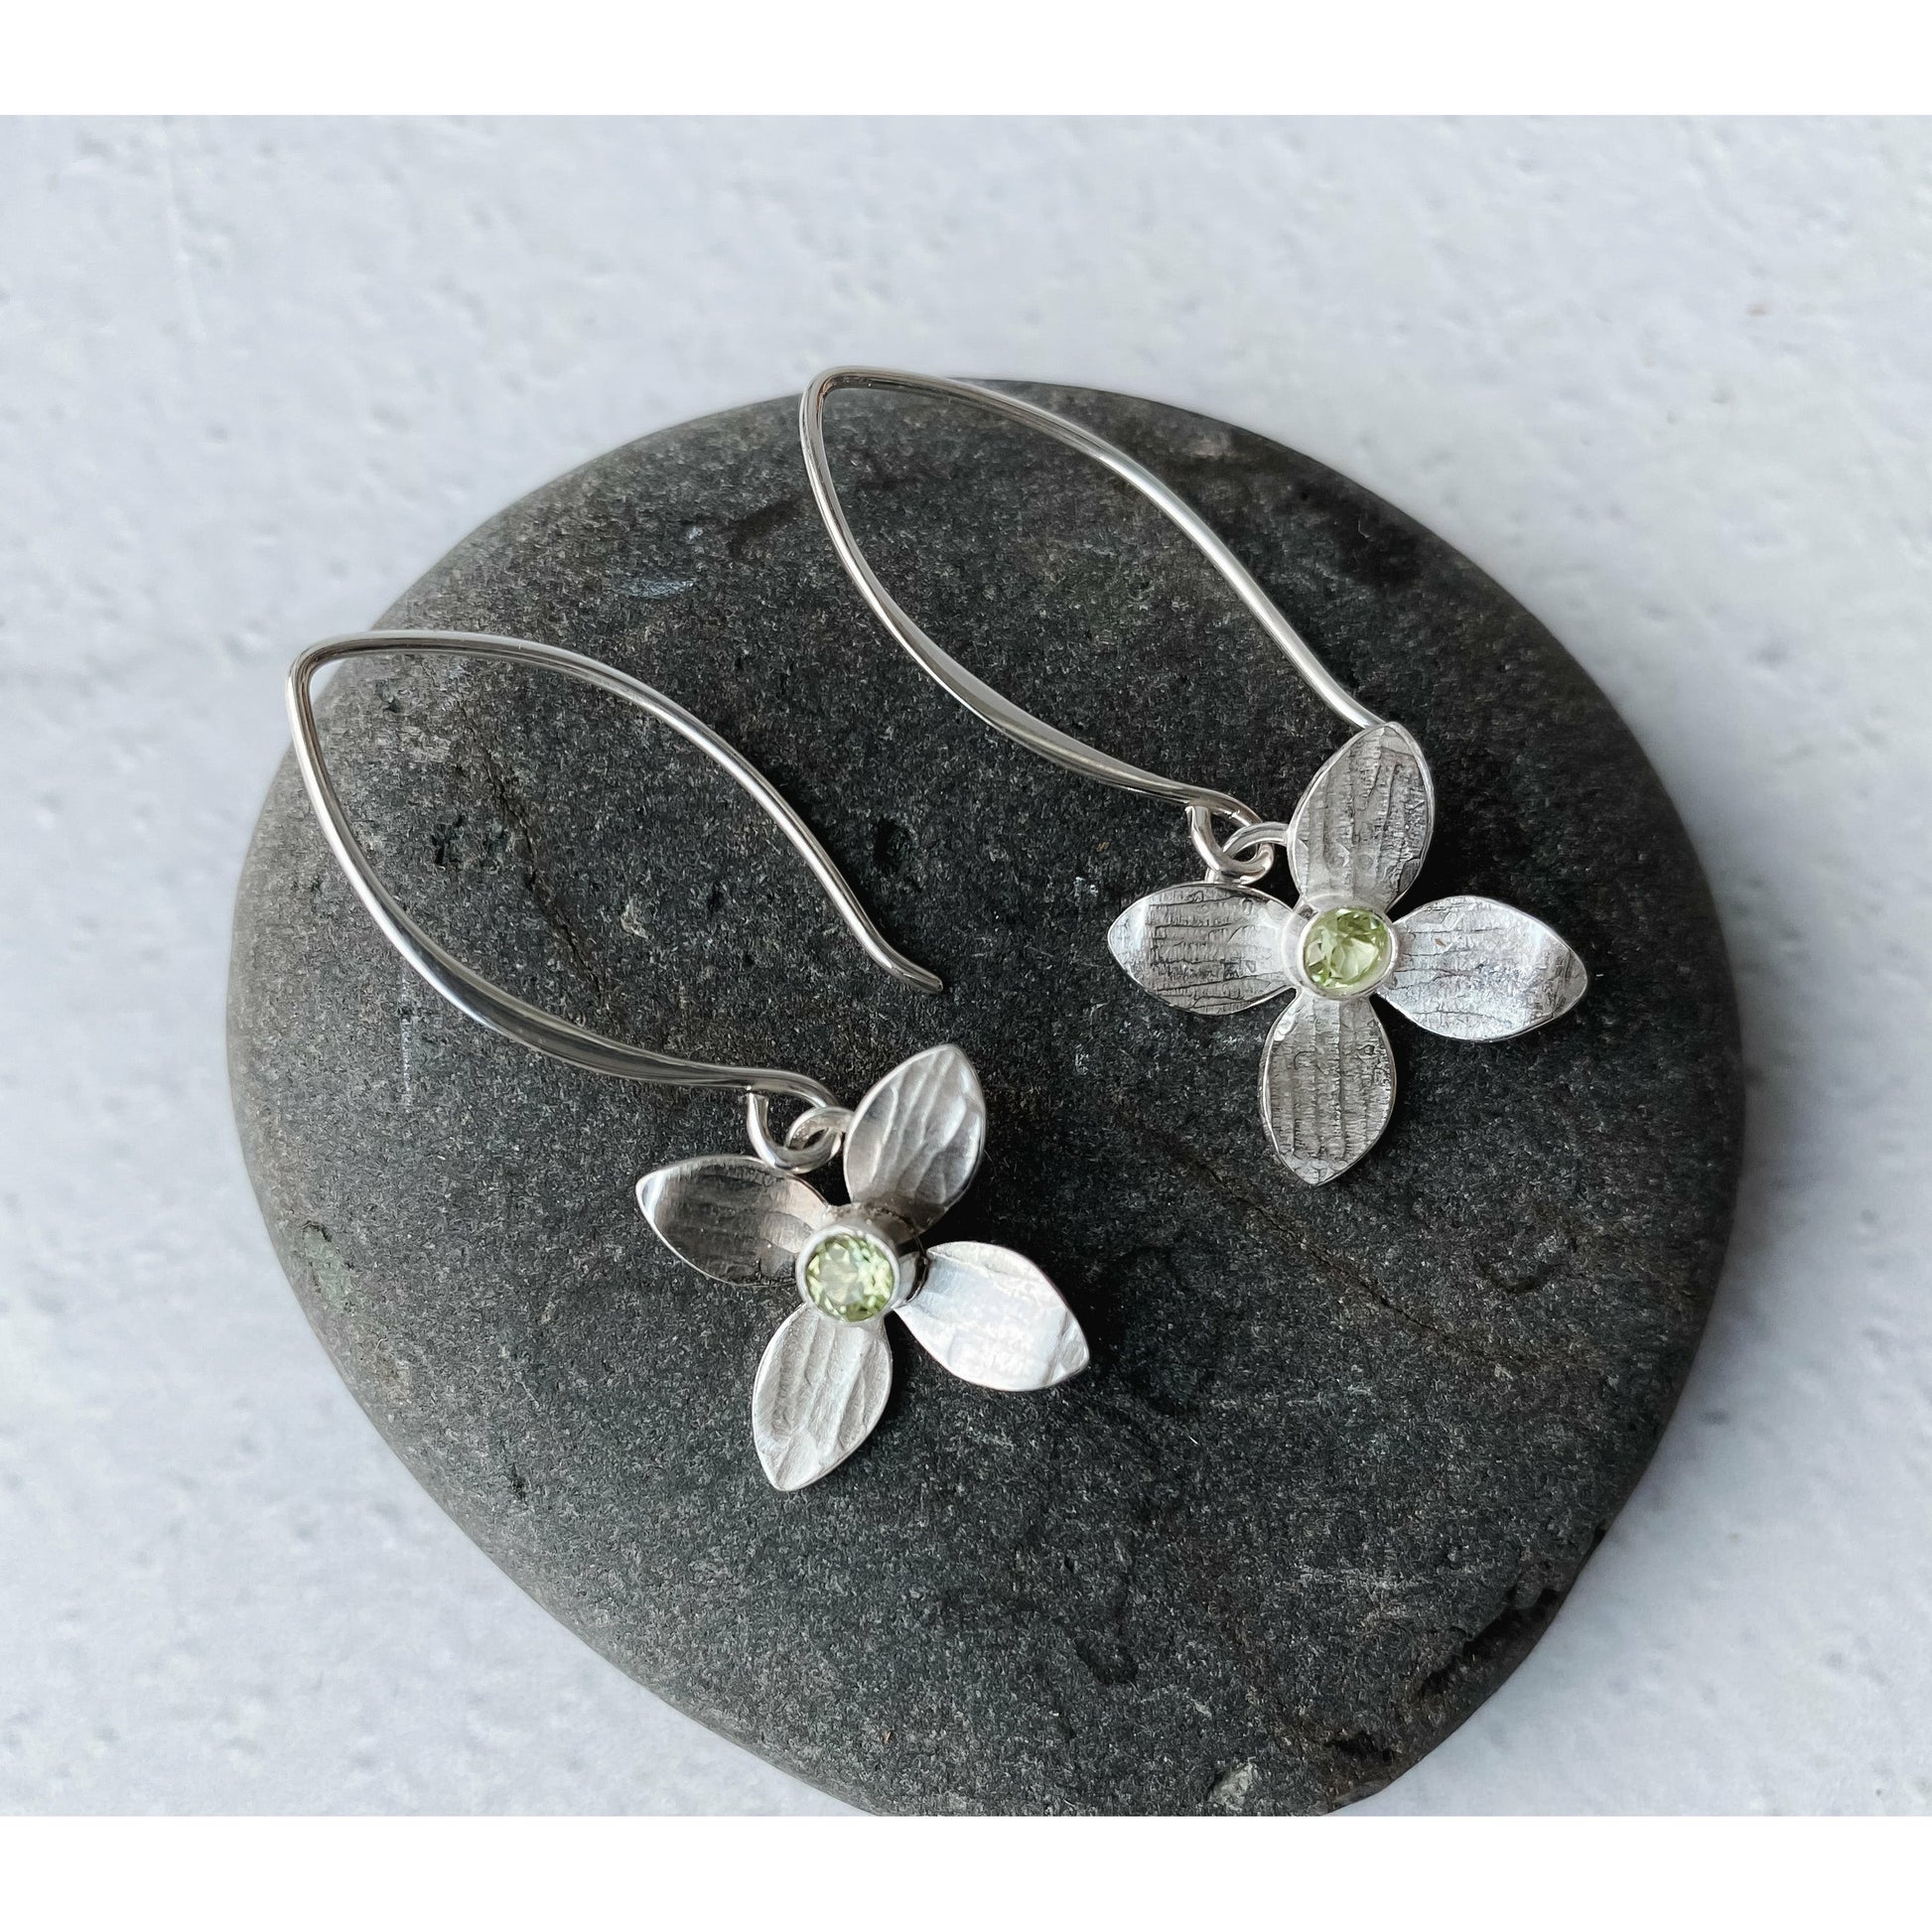 Eloquent Petals~ Sterling Silver Flower Earring Dangles with Peridot Gemstone - Aprilierre